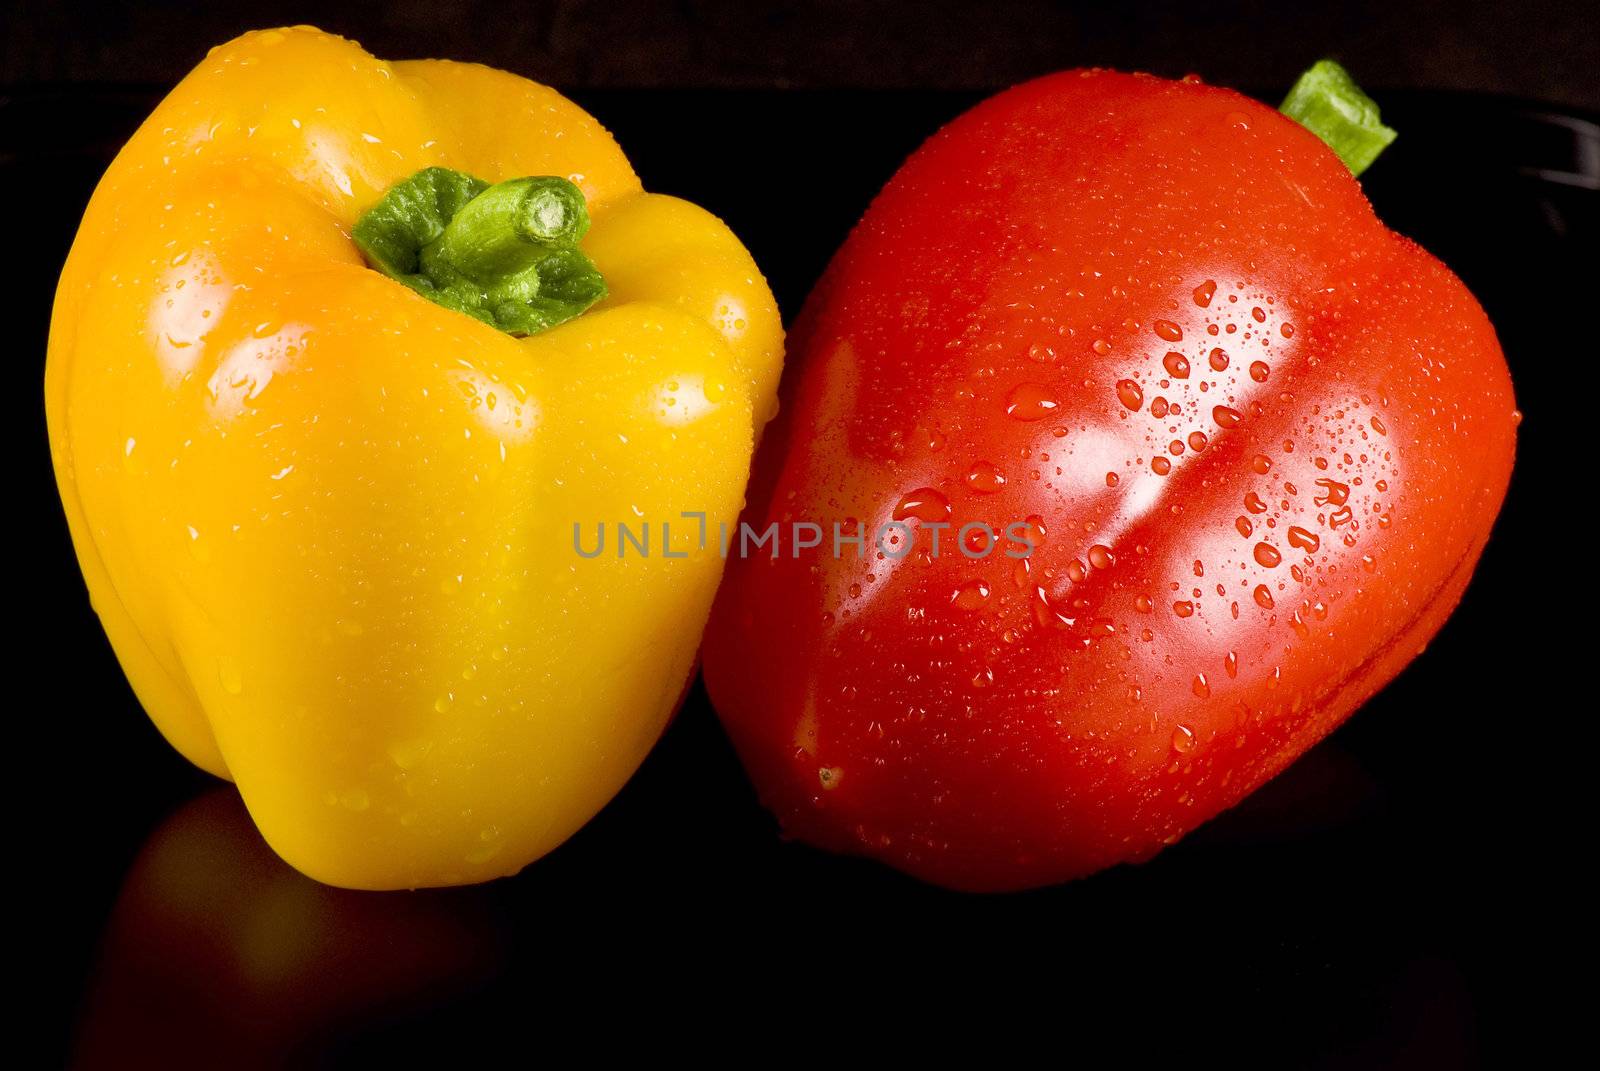 Yellow and red peppers by caldix